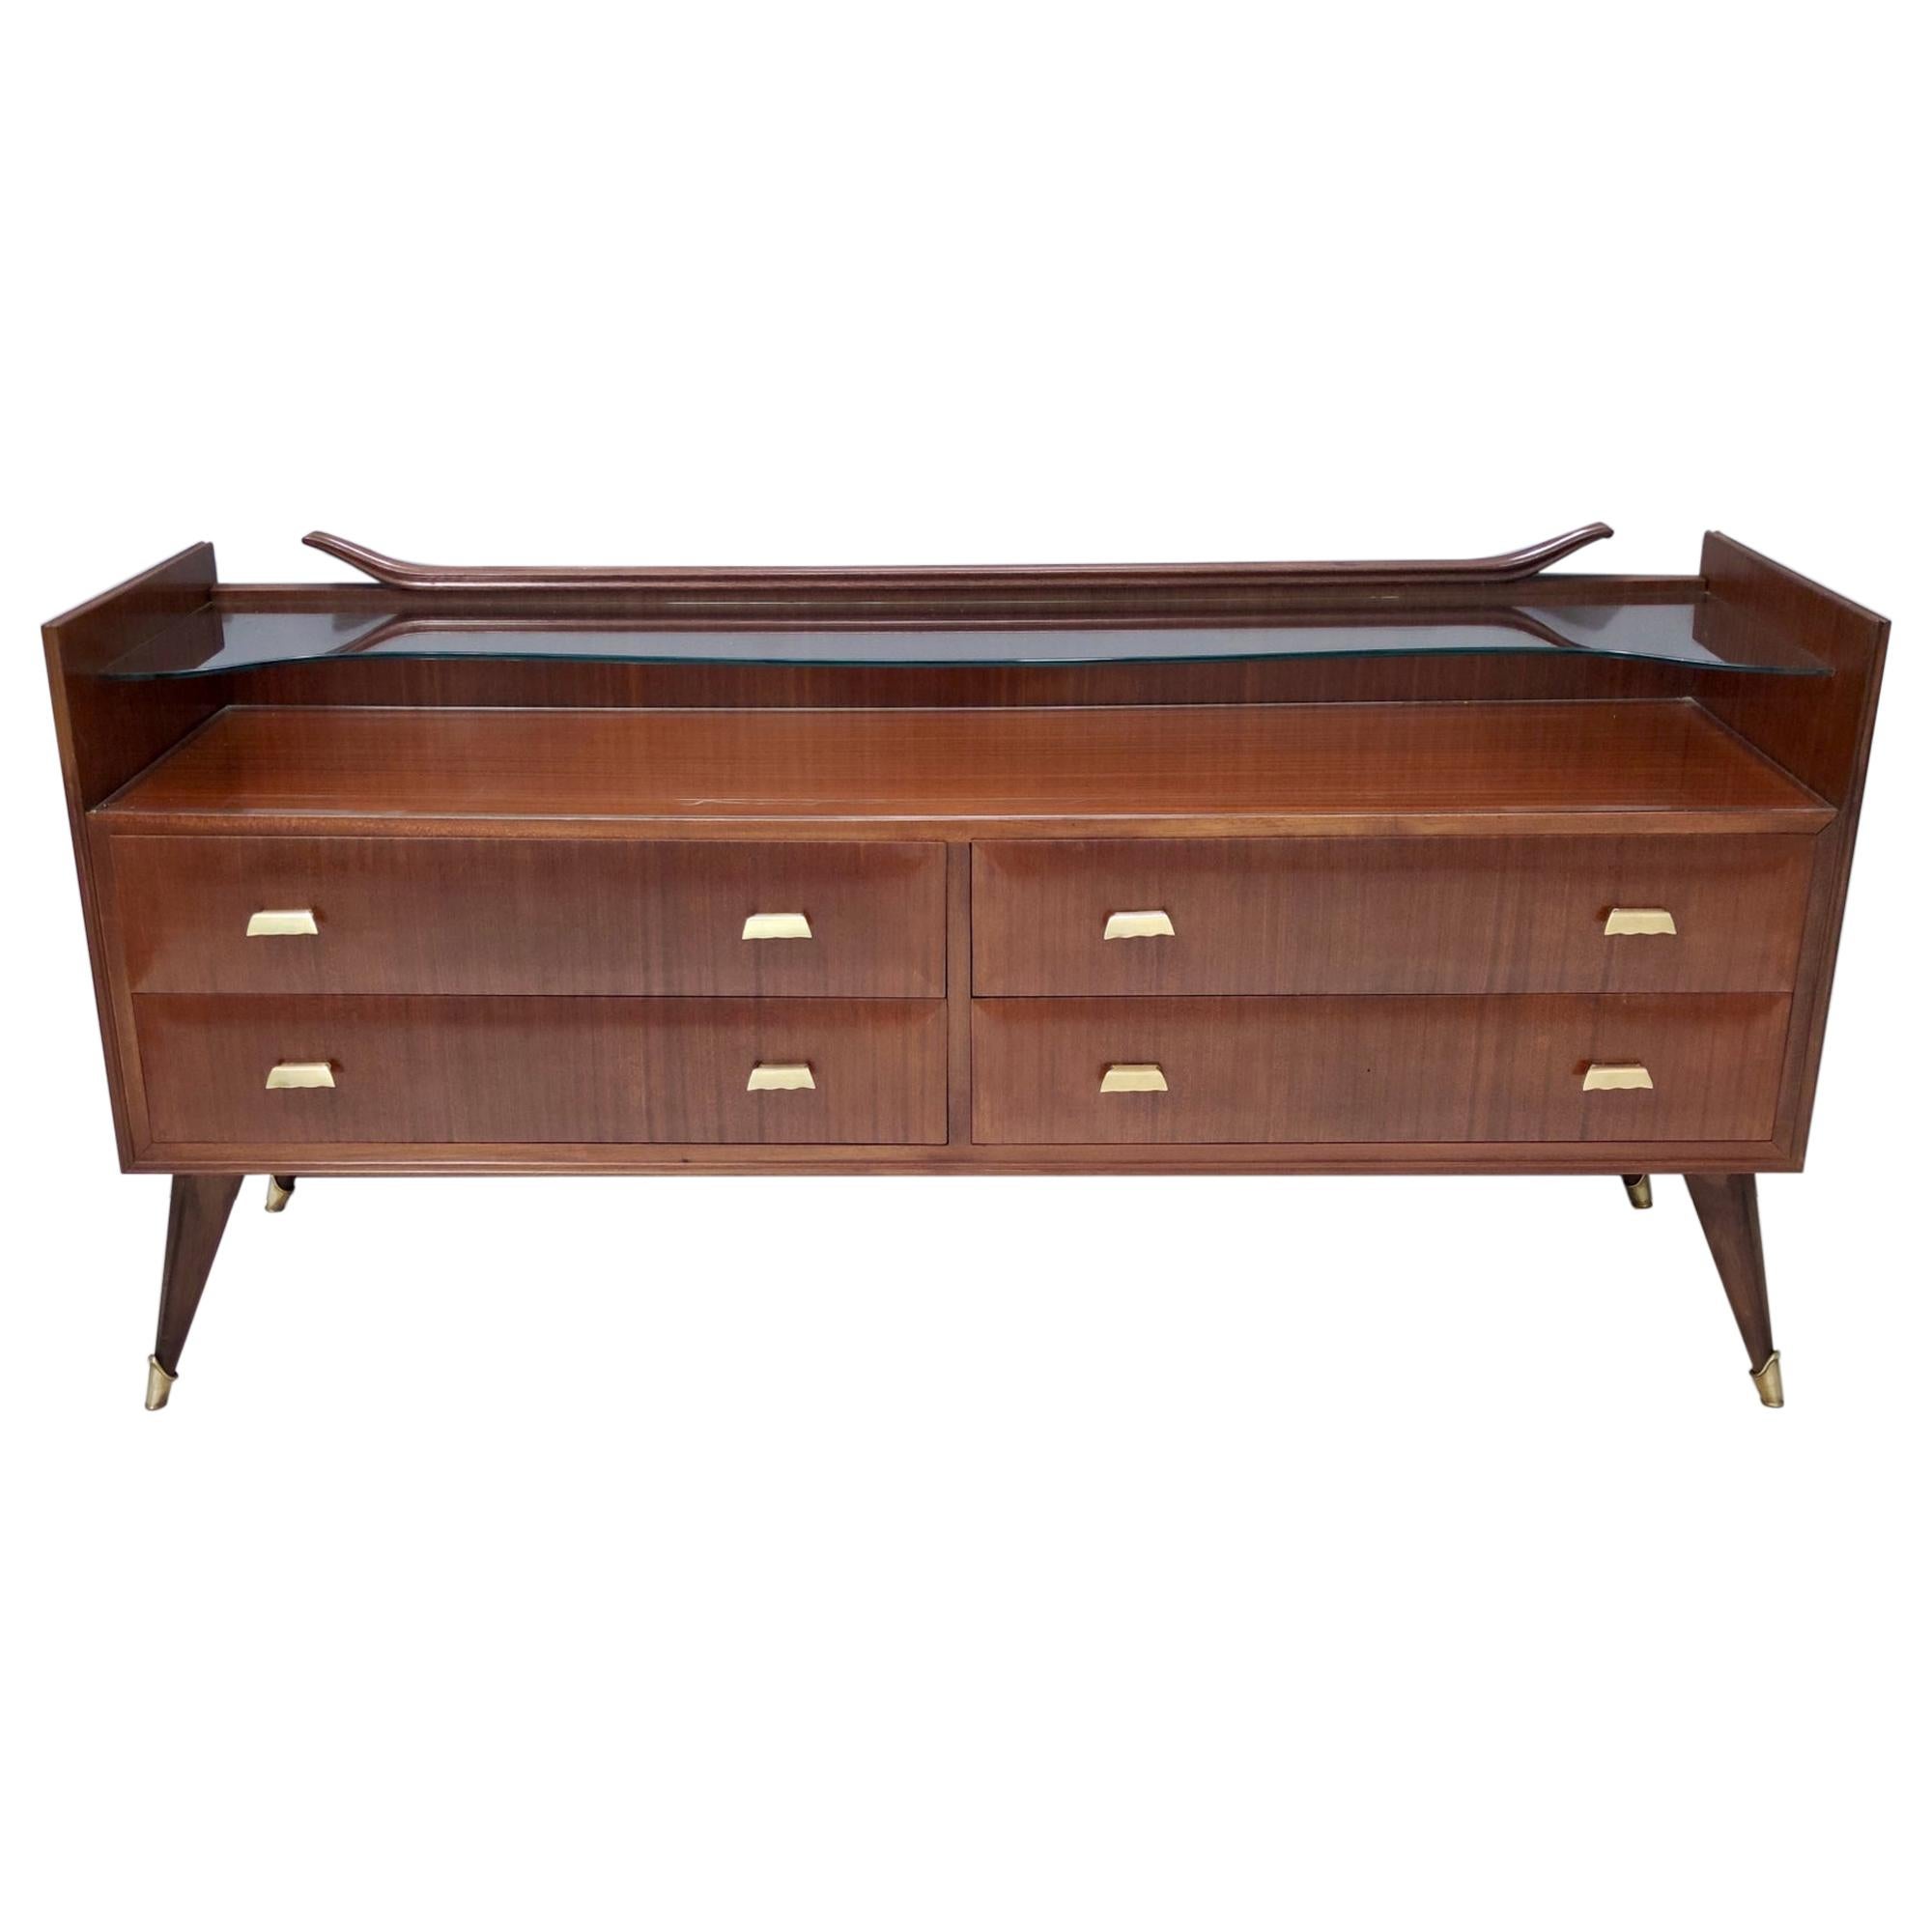 Vintage High-Quality Walnut Chest of Drawers with a Thick Glass Top, Italy